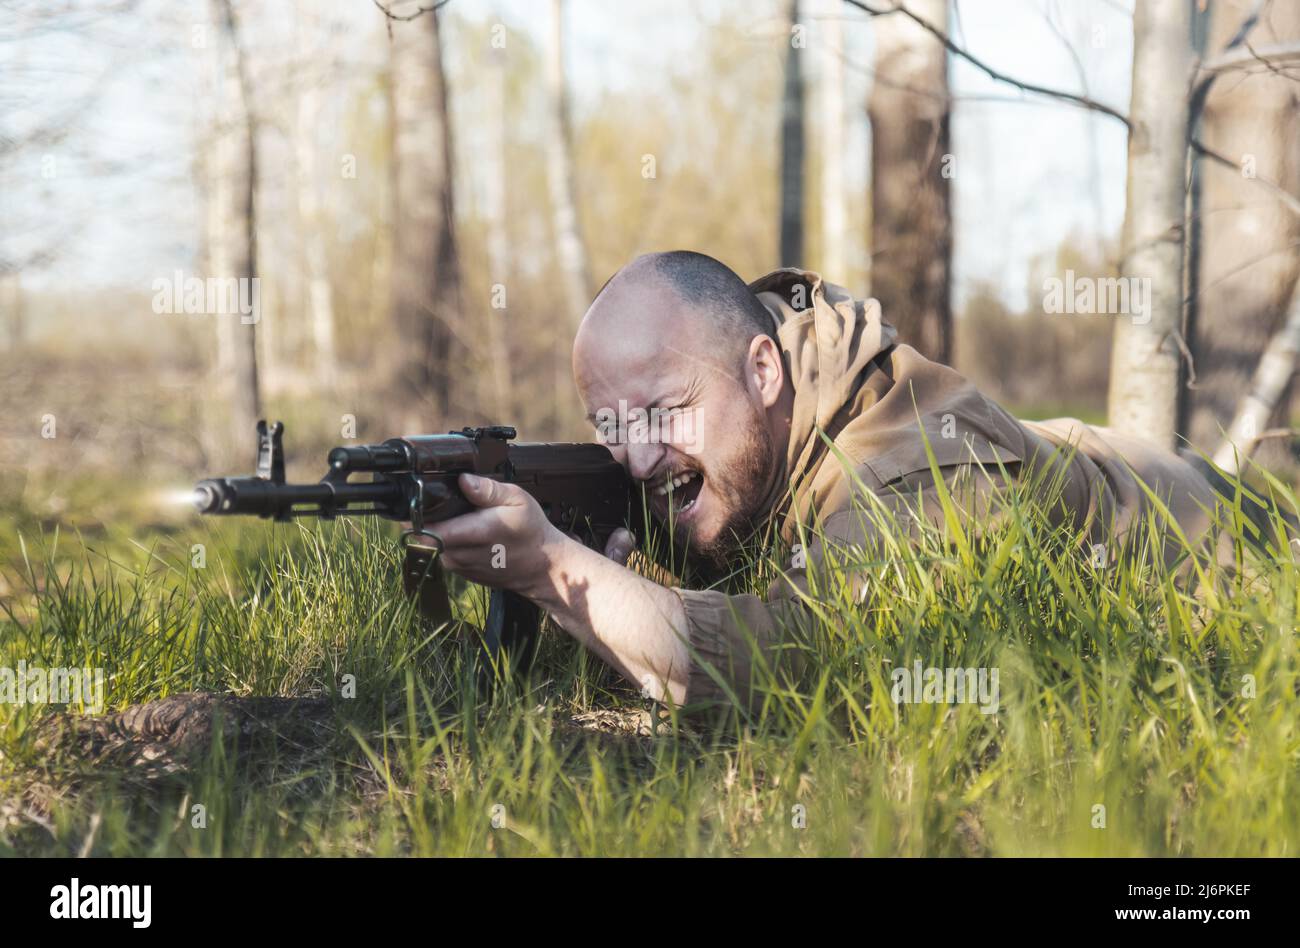 warrior shoots from a machine gun lying on the ground Stock Photo